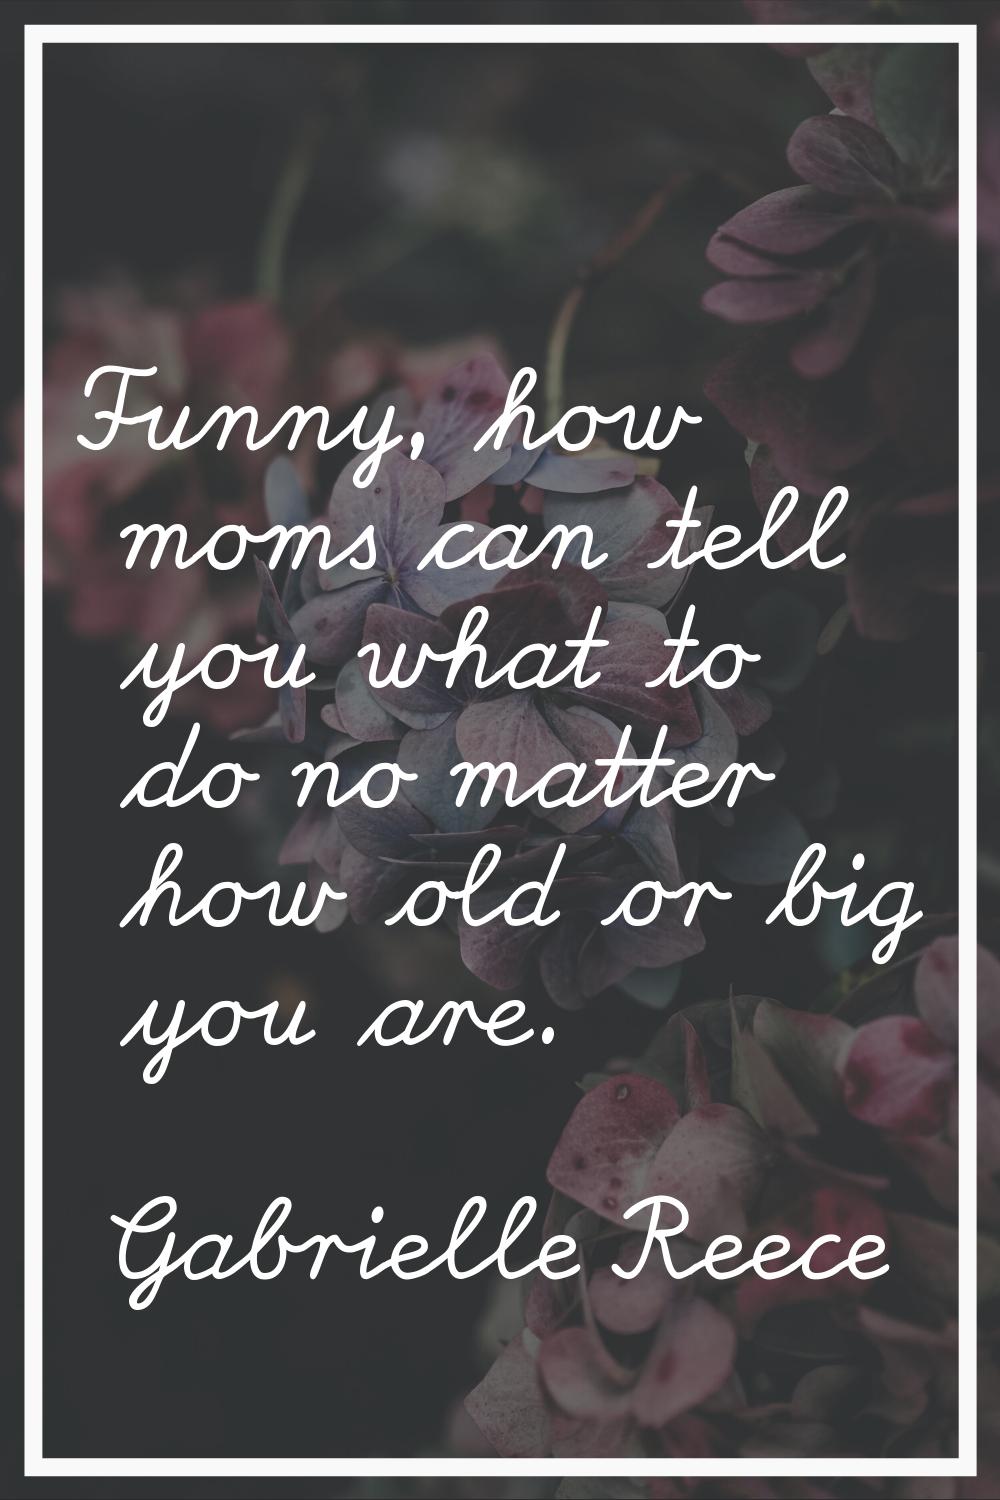 Funny, how moms can tell you what to do no matter how old or big you are.